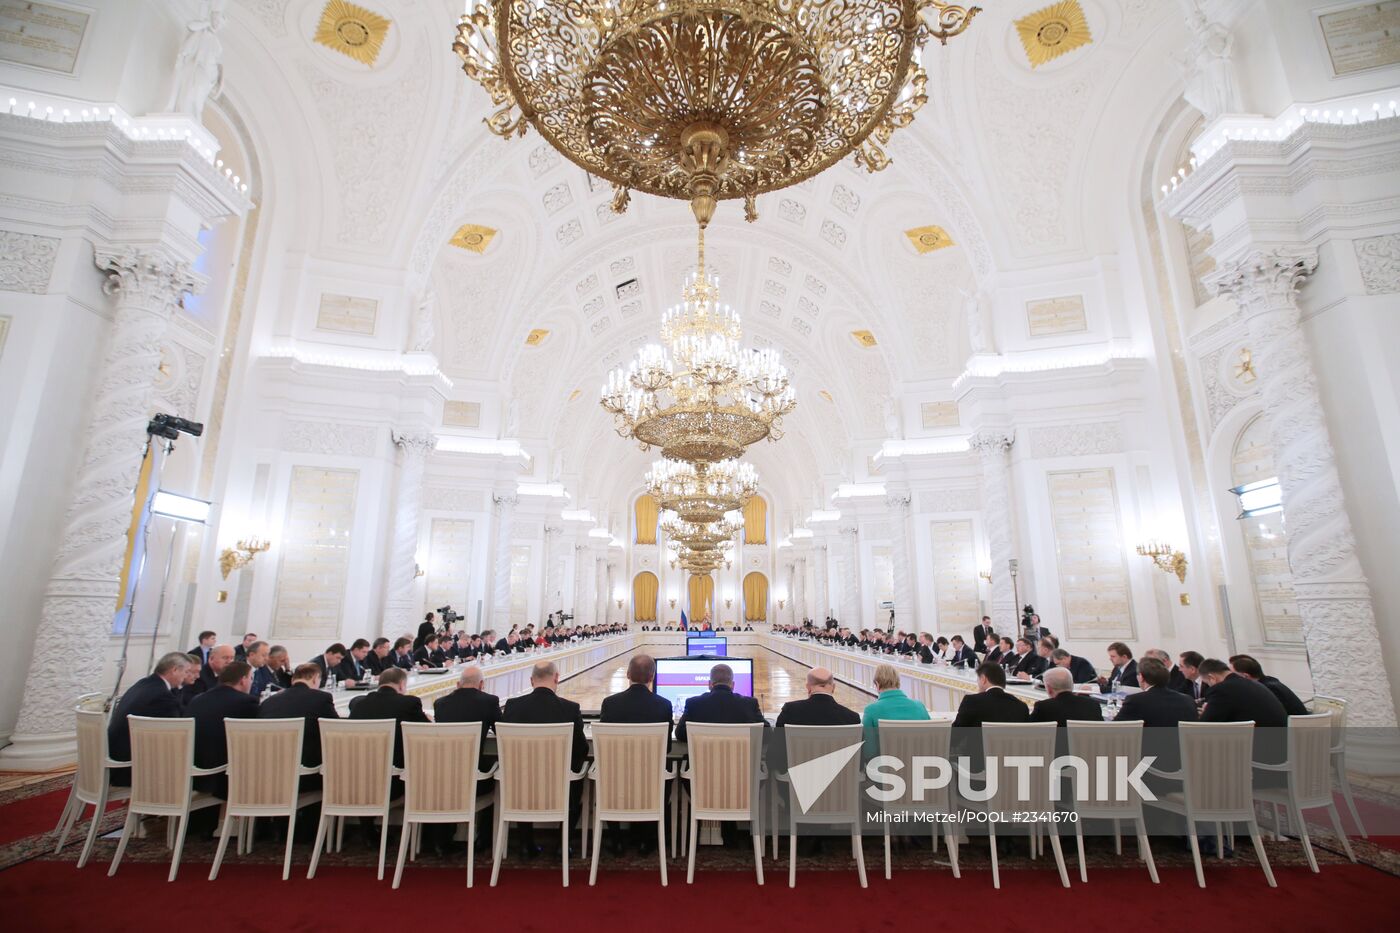 Russian State Council meeting